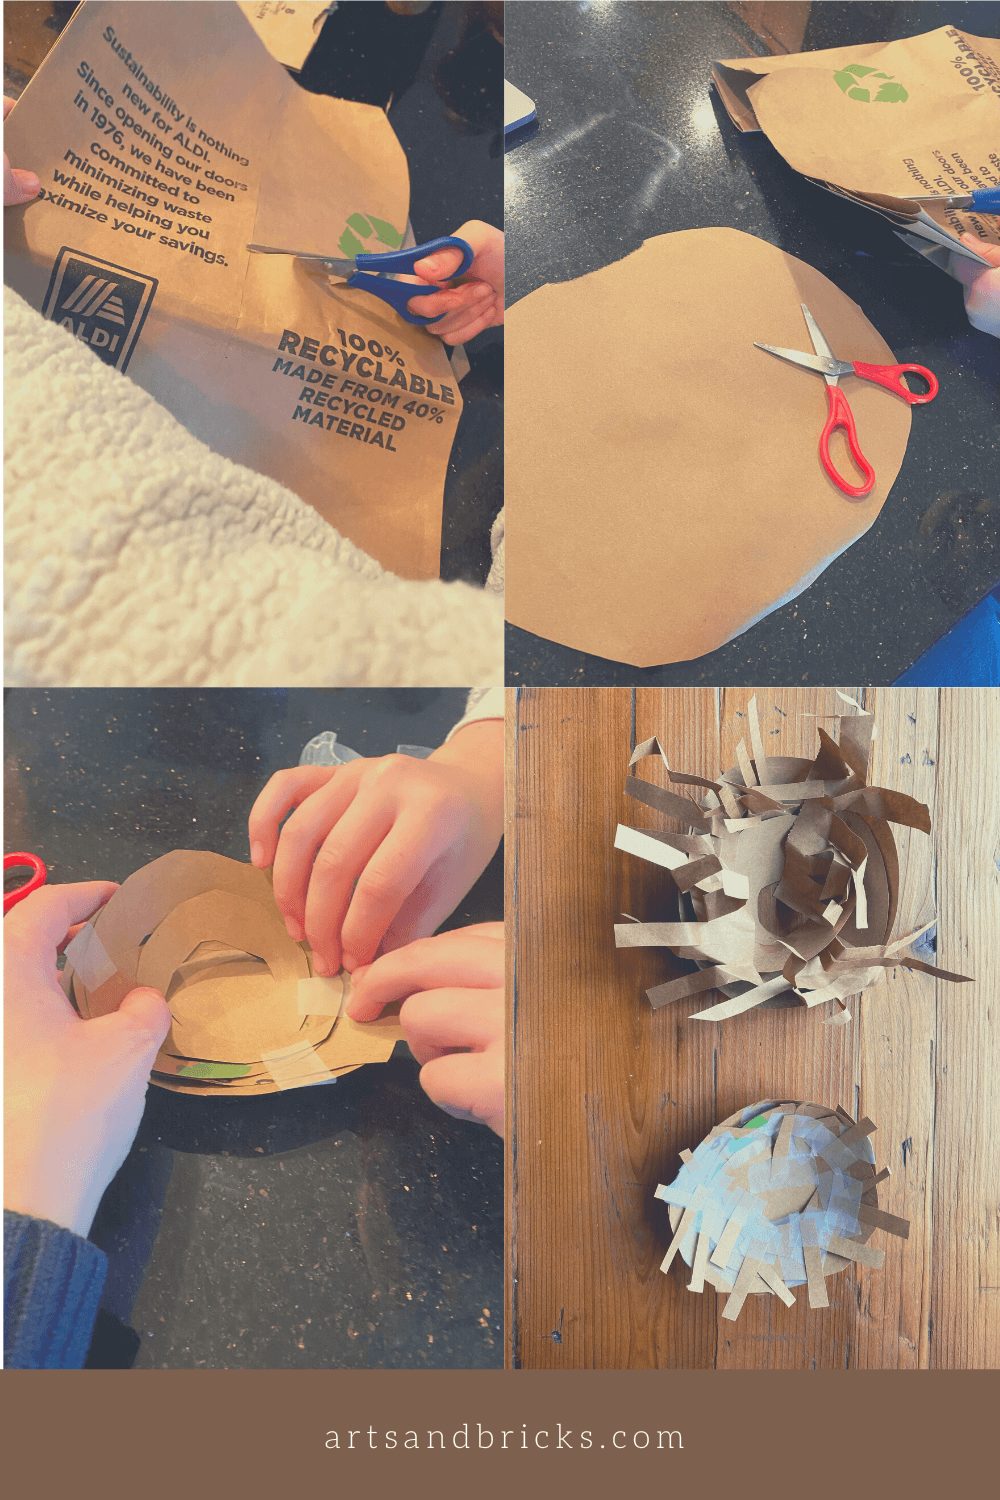 Directions on how to make a nest from a paper bag